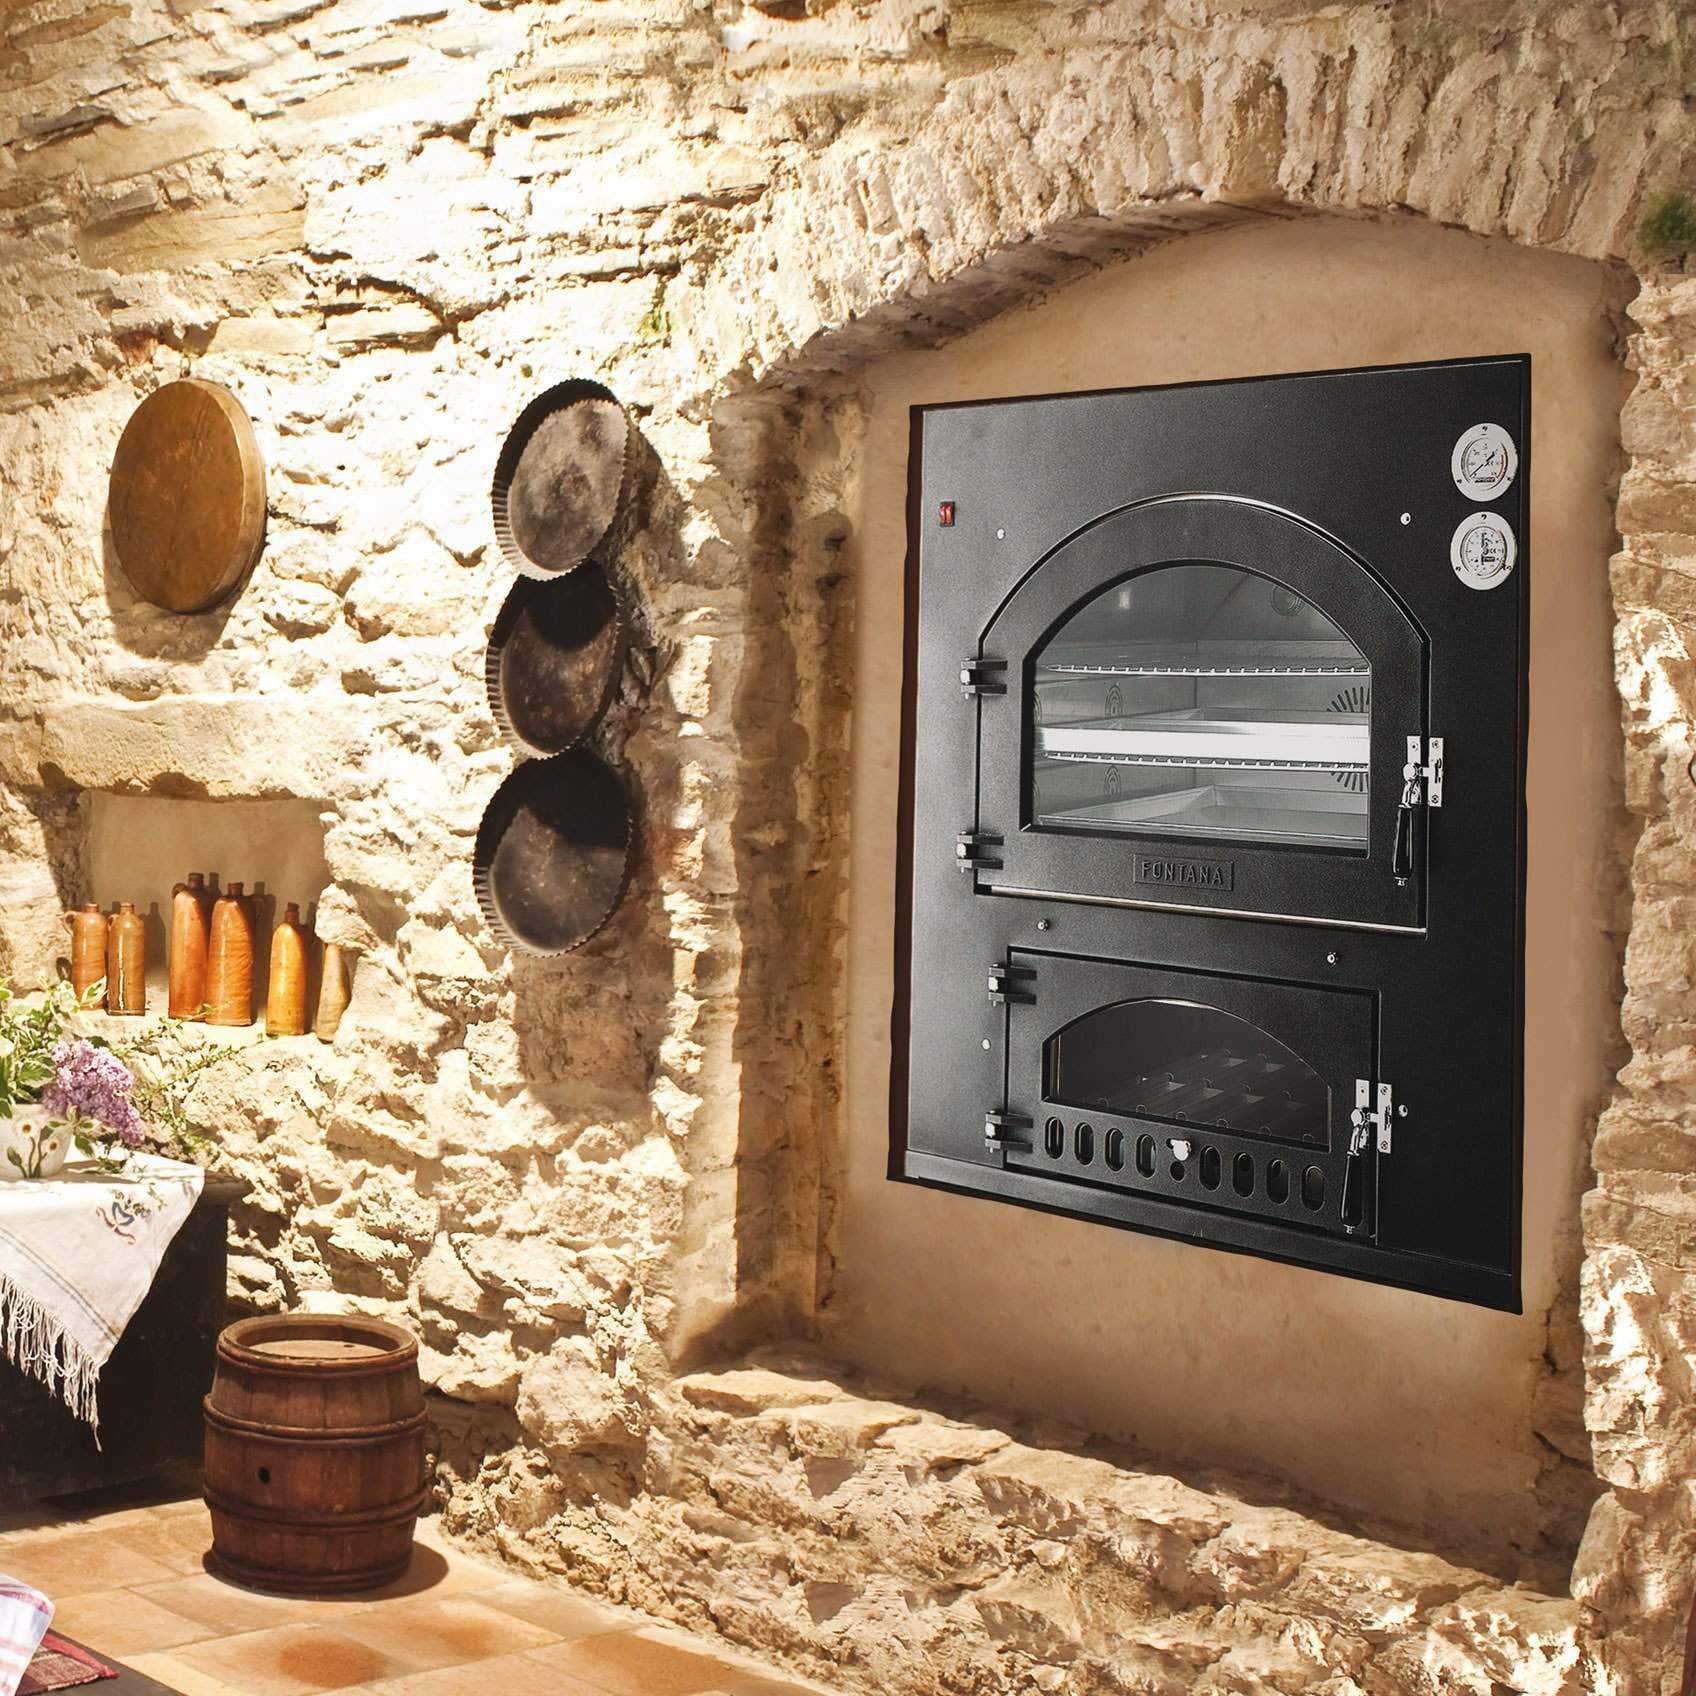 Fontana Pizza Oven The Inc Q Built-in Wood-Burning Oven